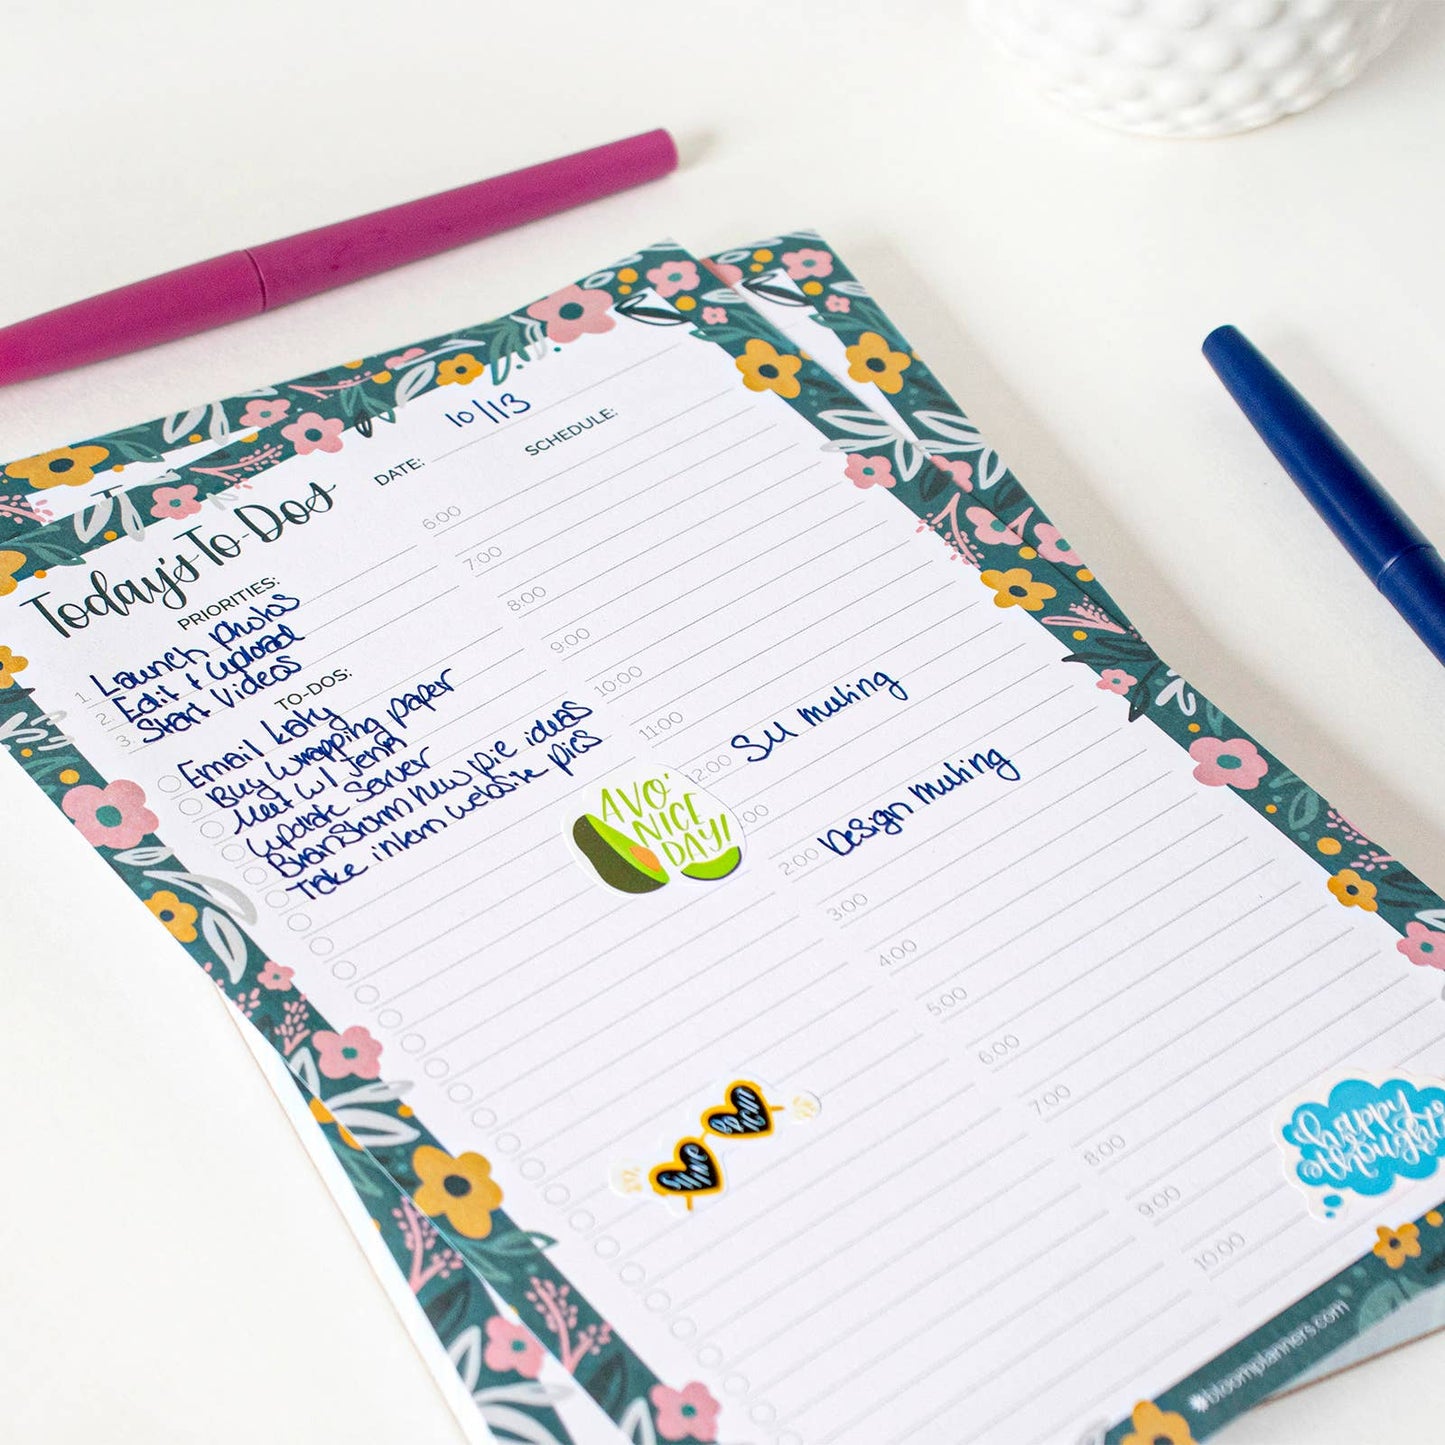 6x9 Timed Daily Planning Pad, Choose Design: Garden Blooms Core bloom daily planners